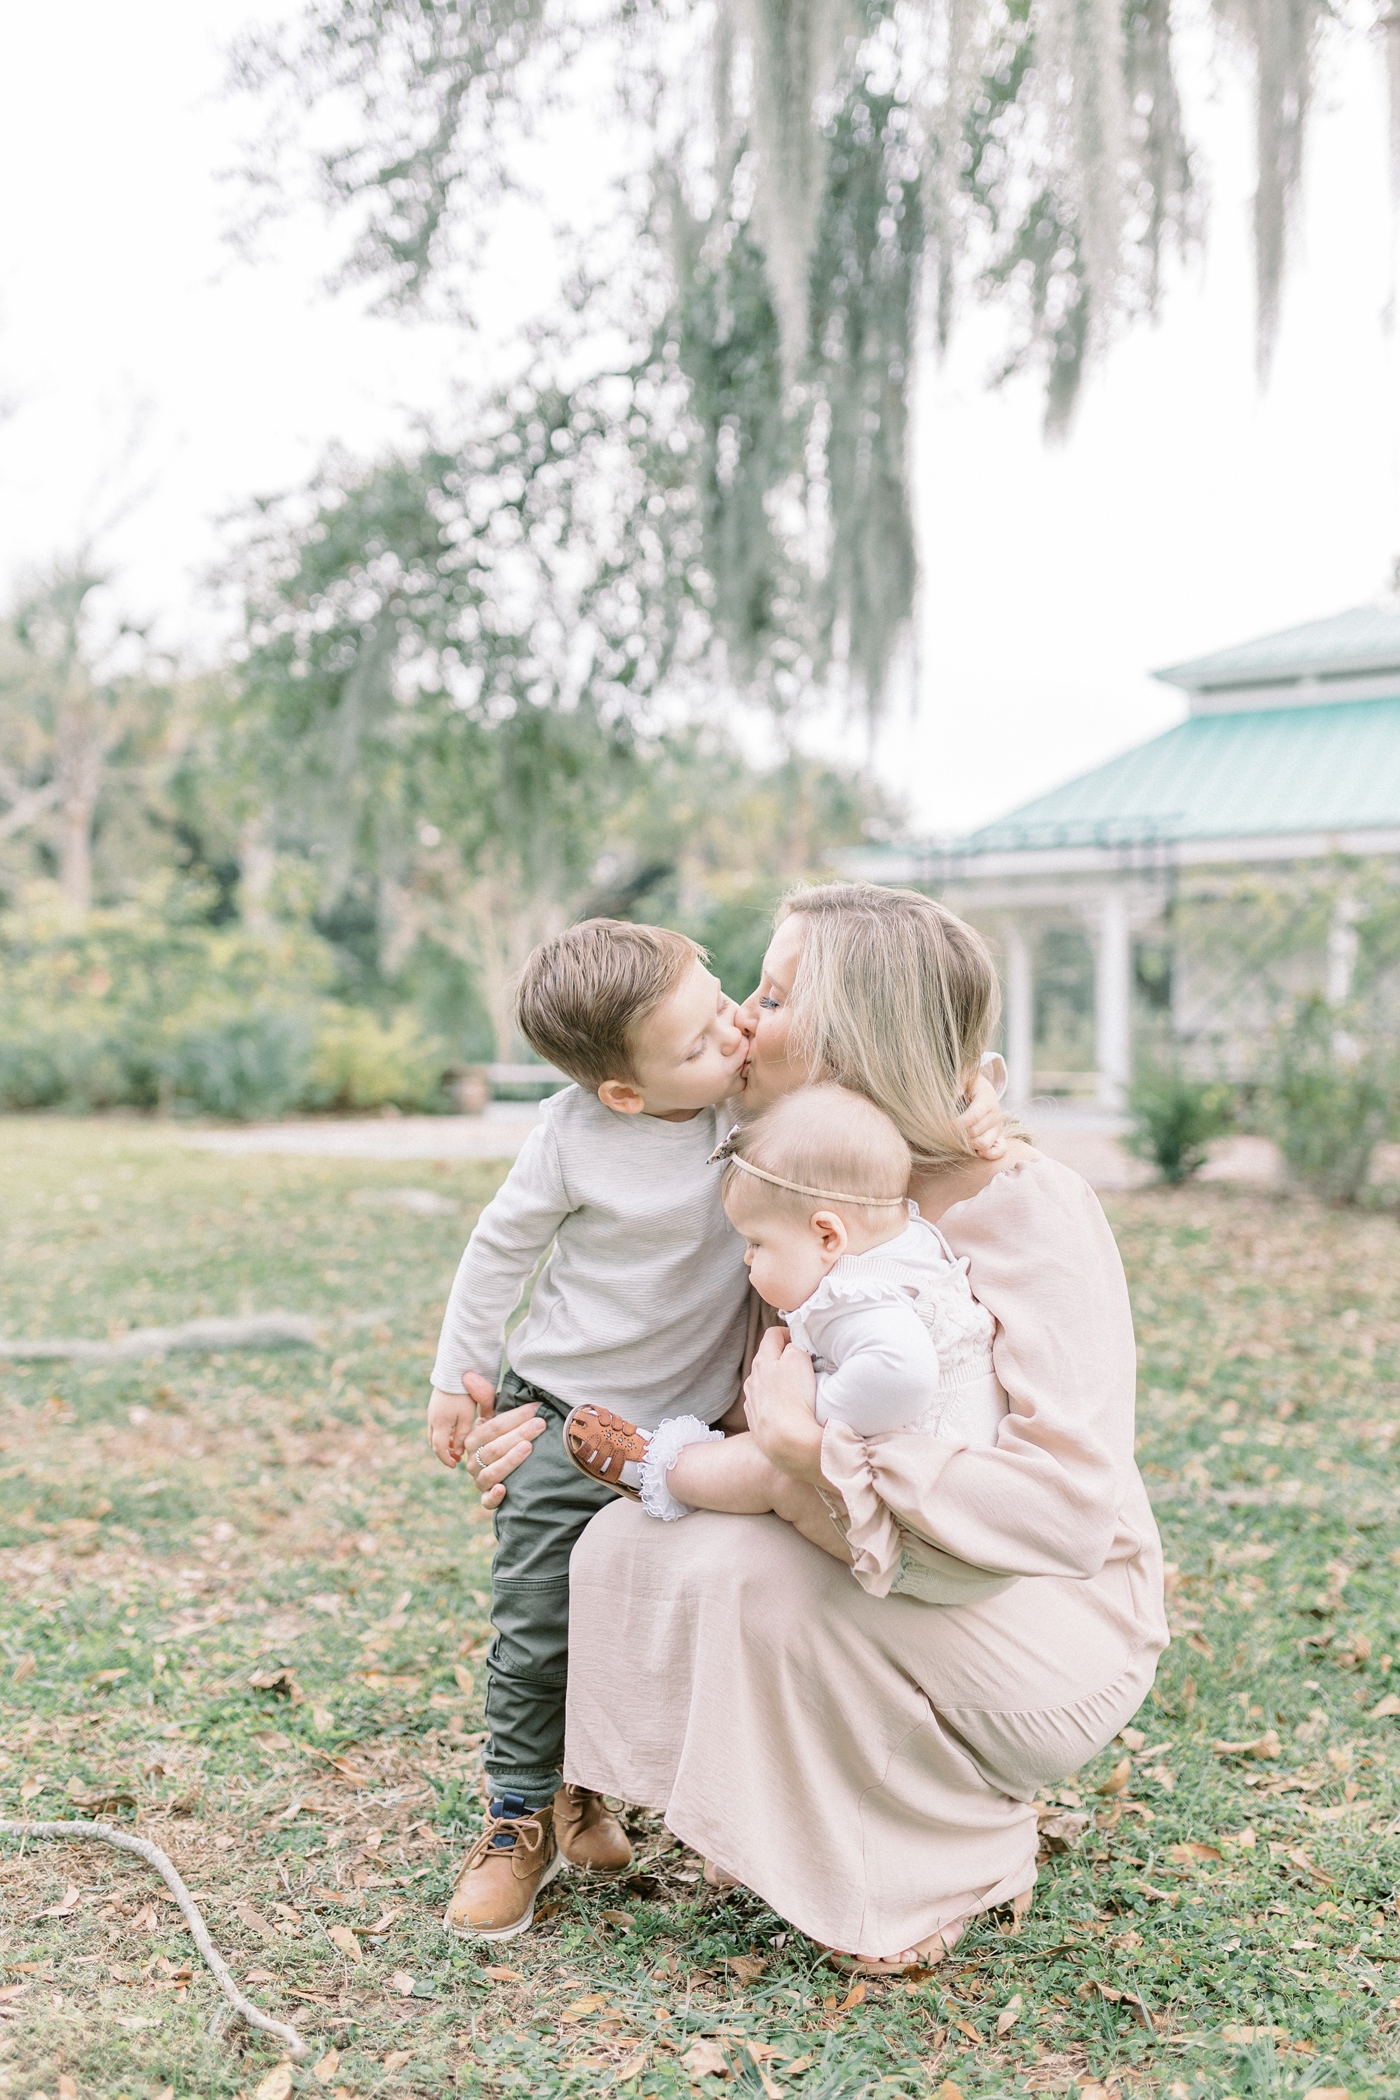 Toddler giving Mom a kiss during family session surrounded by Spanish moss.Photo by Caitlyn Motycka Photography.